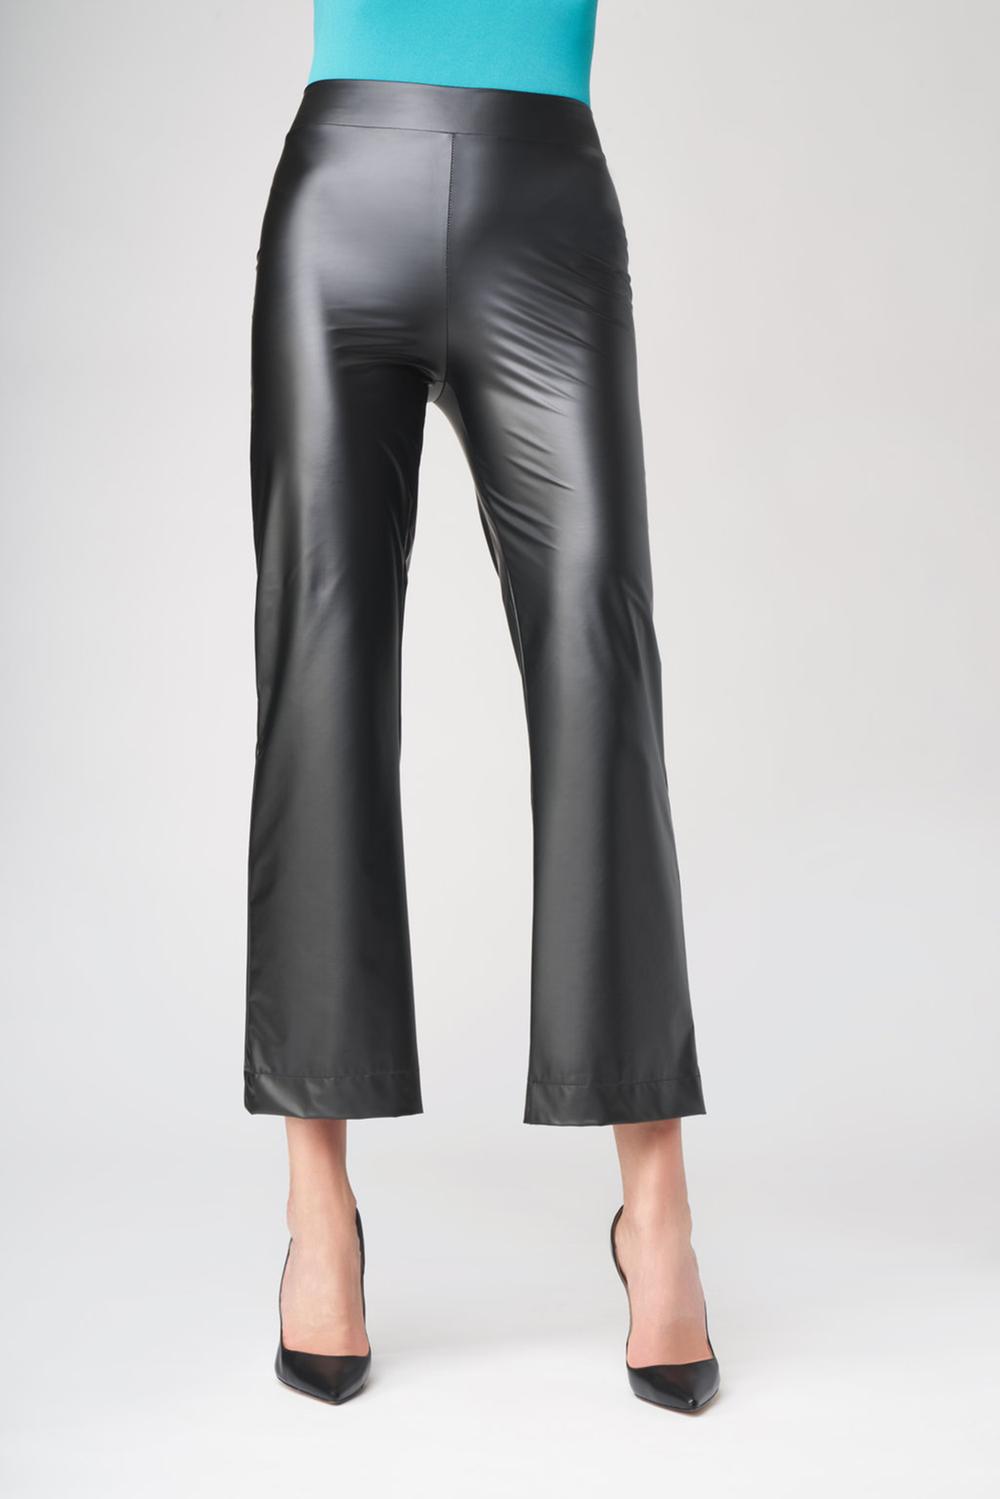 SiSi Effetto Pelle - Light weight black faux leather wide leg cropped trouser leggings with elasticated waistband.